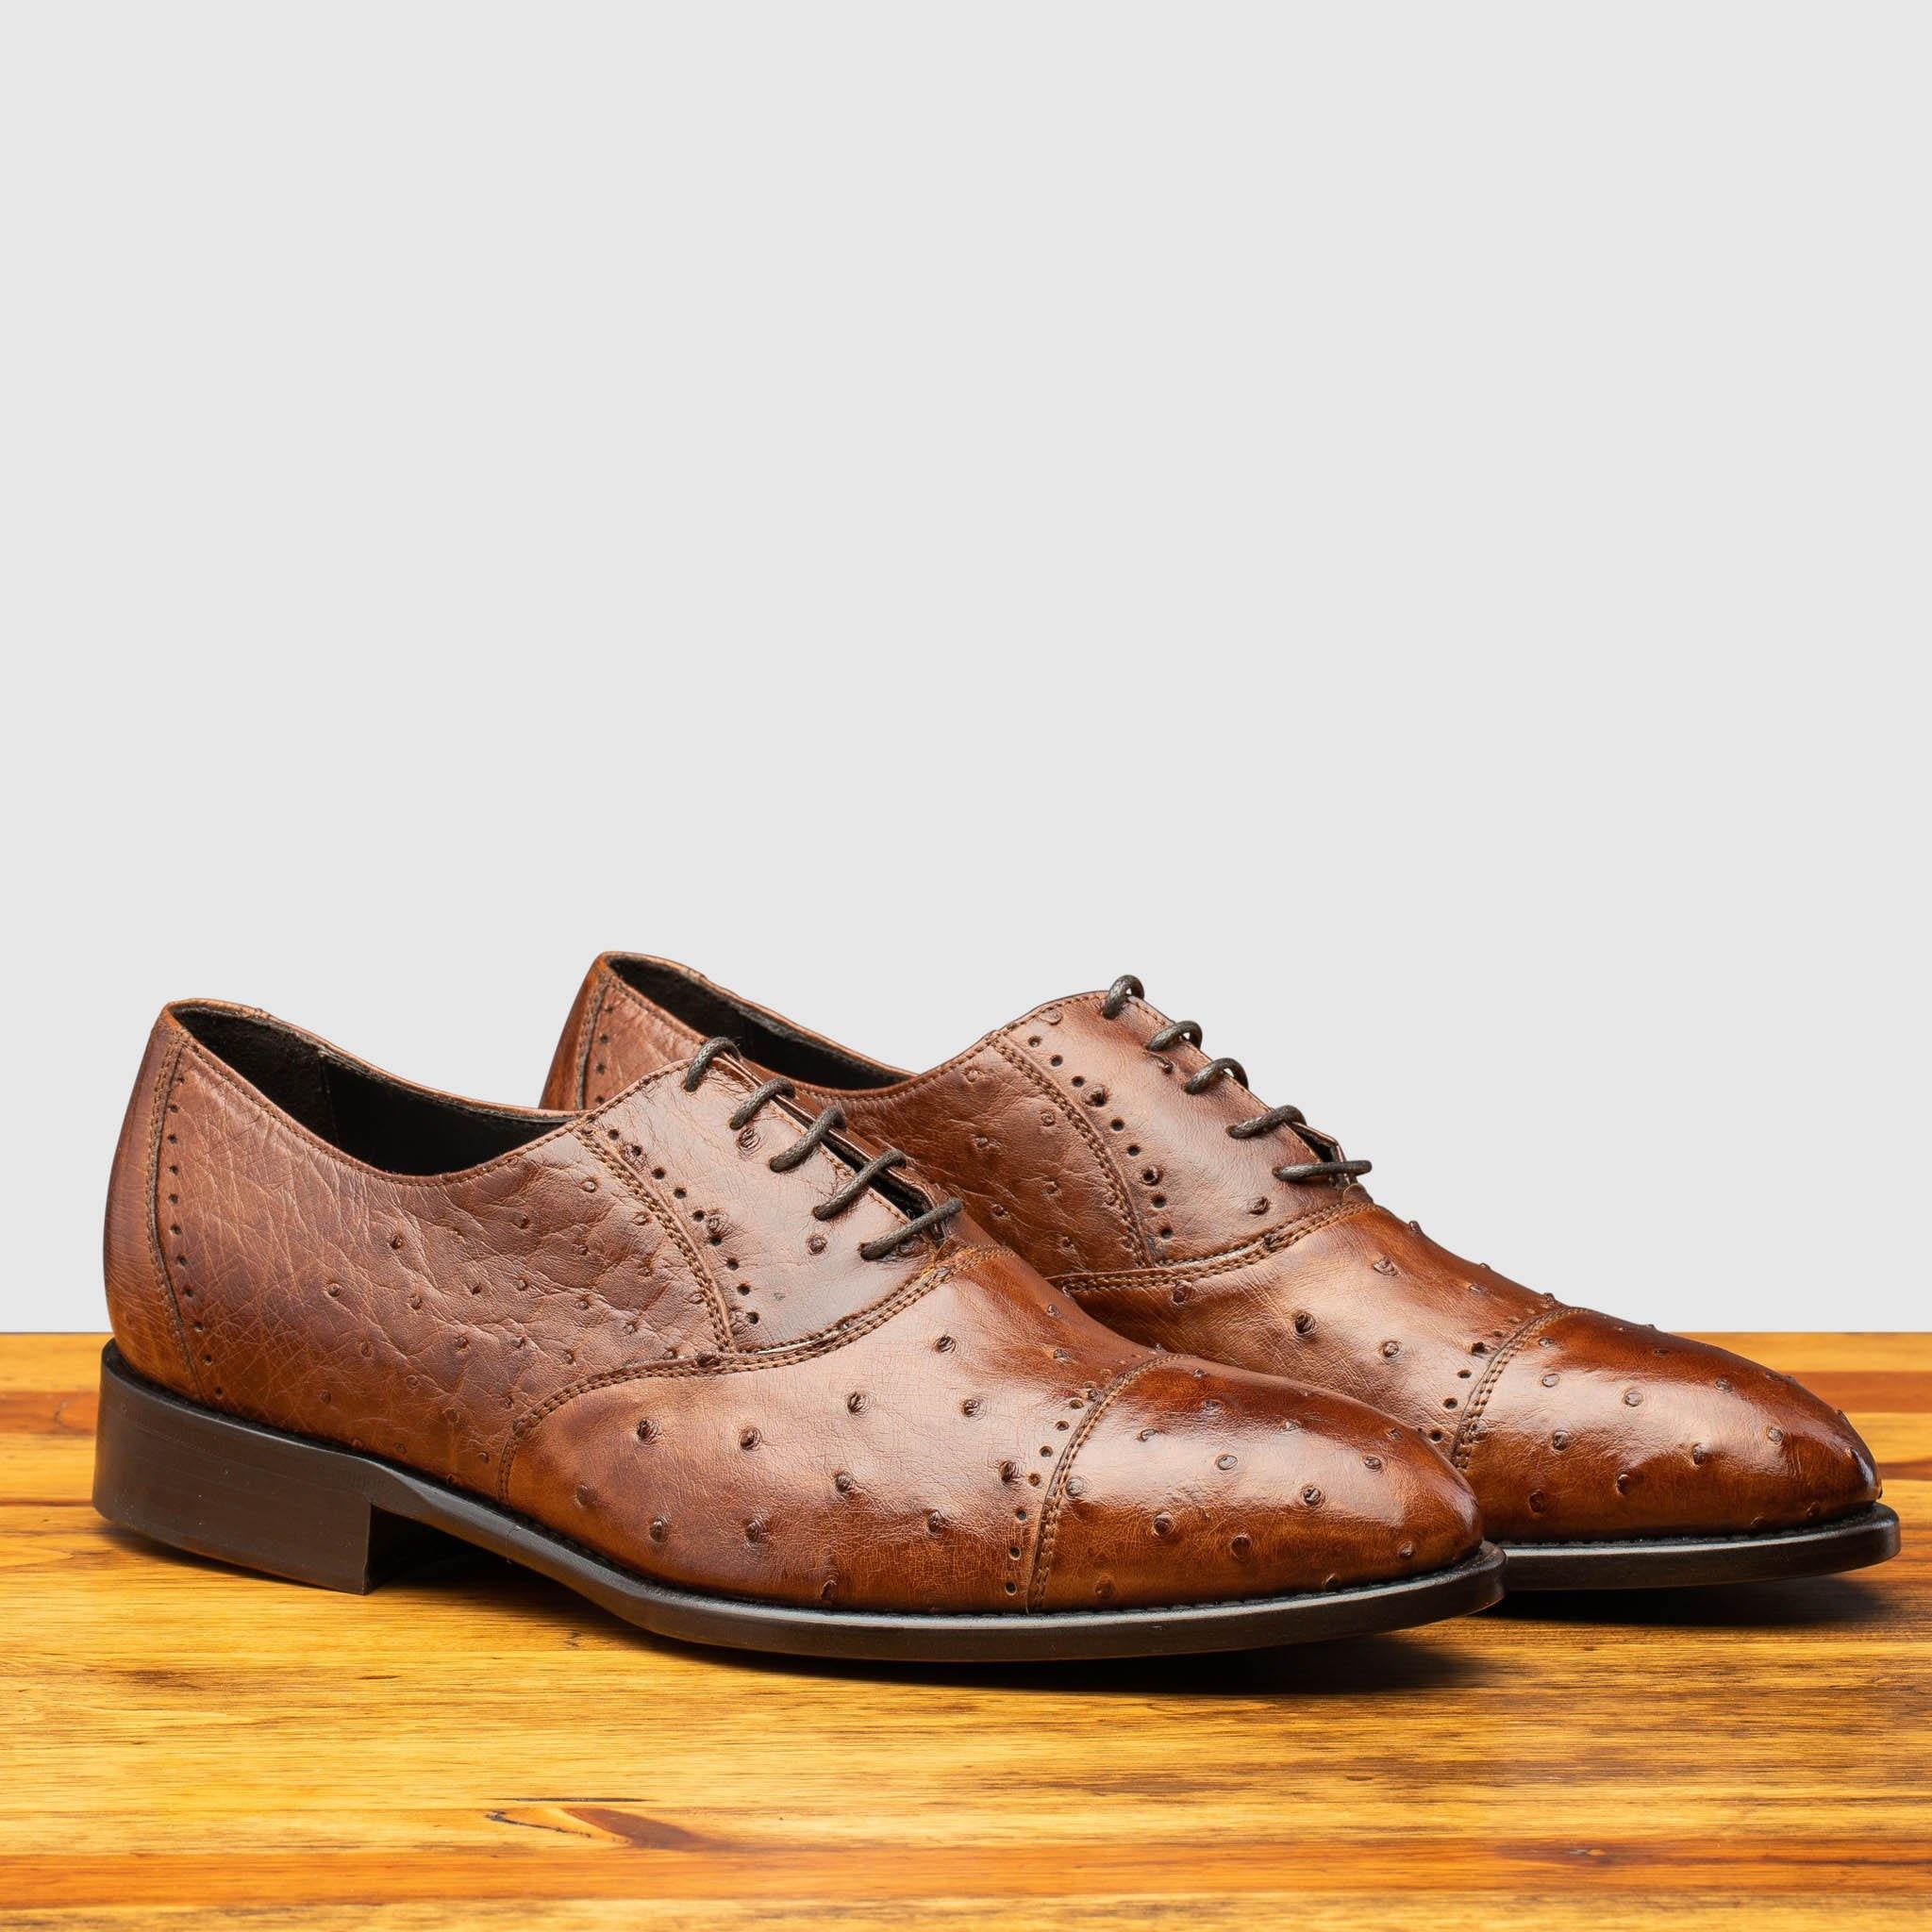 Pair of H777 Calzoleria Toscana Cognac Ostrich Cap Toe on top of a wooden table